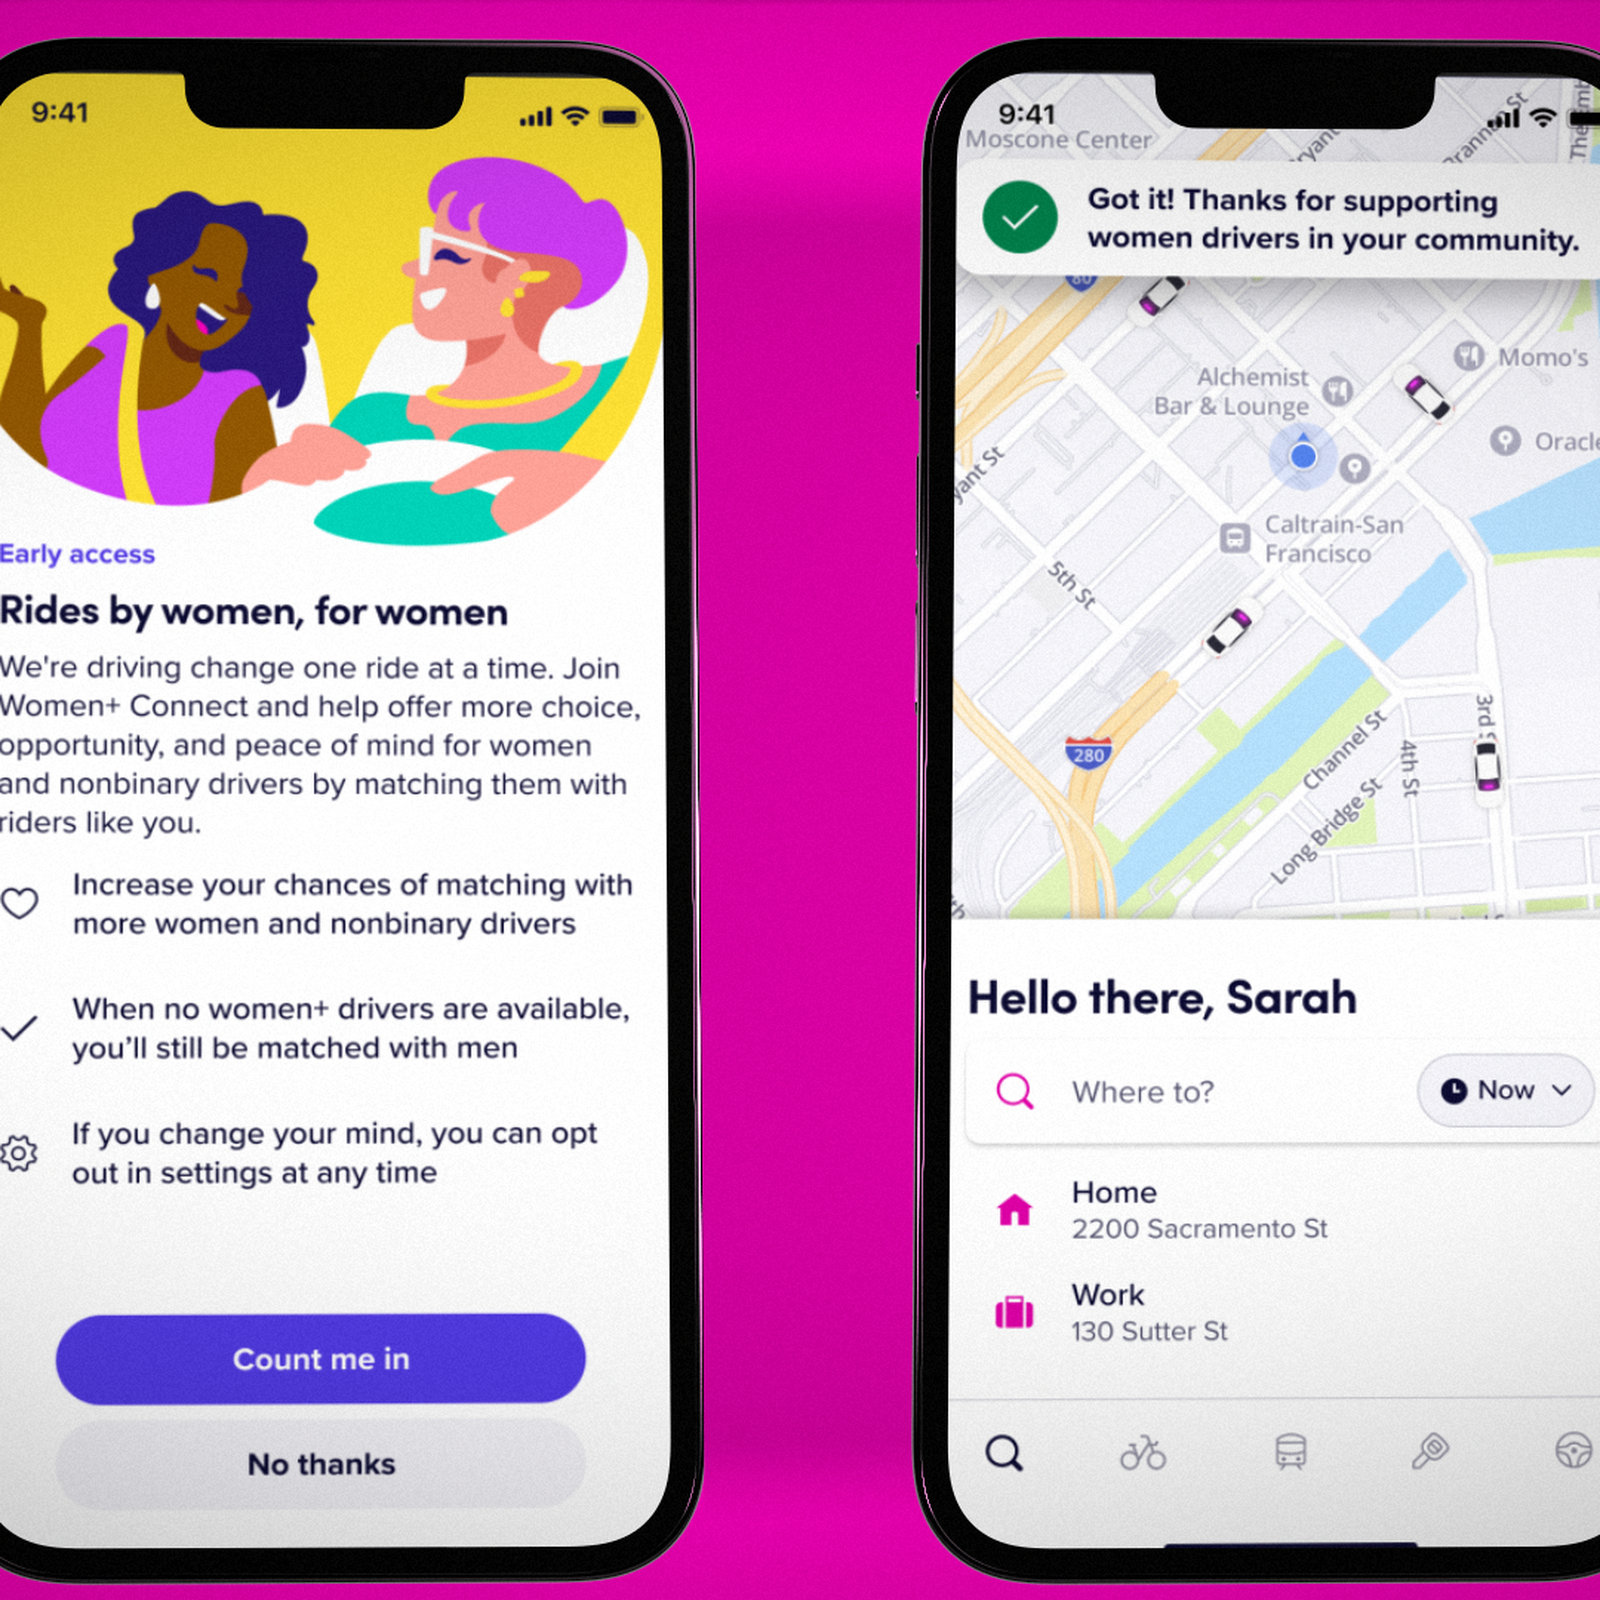 Lyft's new feature connects women and nonbinary drivers and passengers